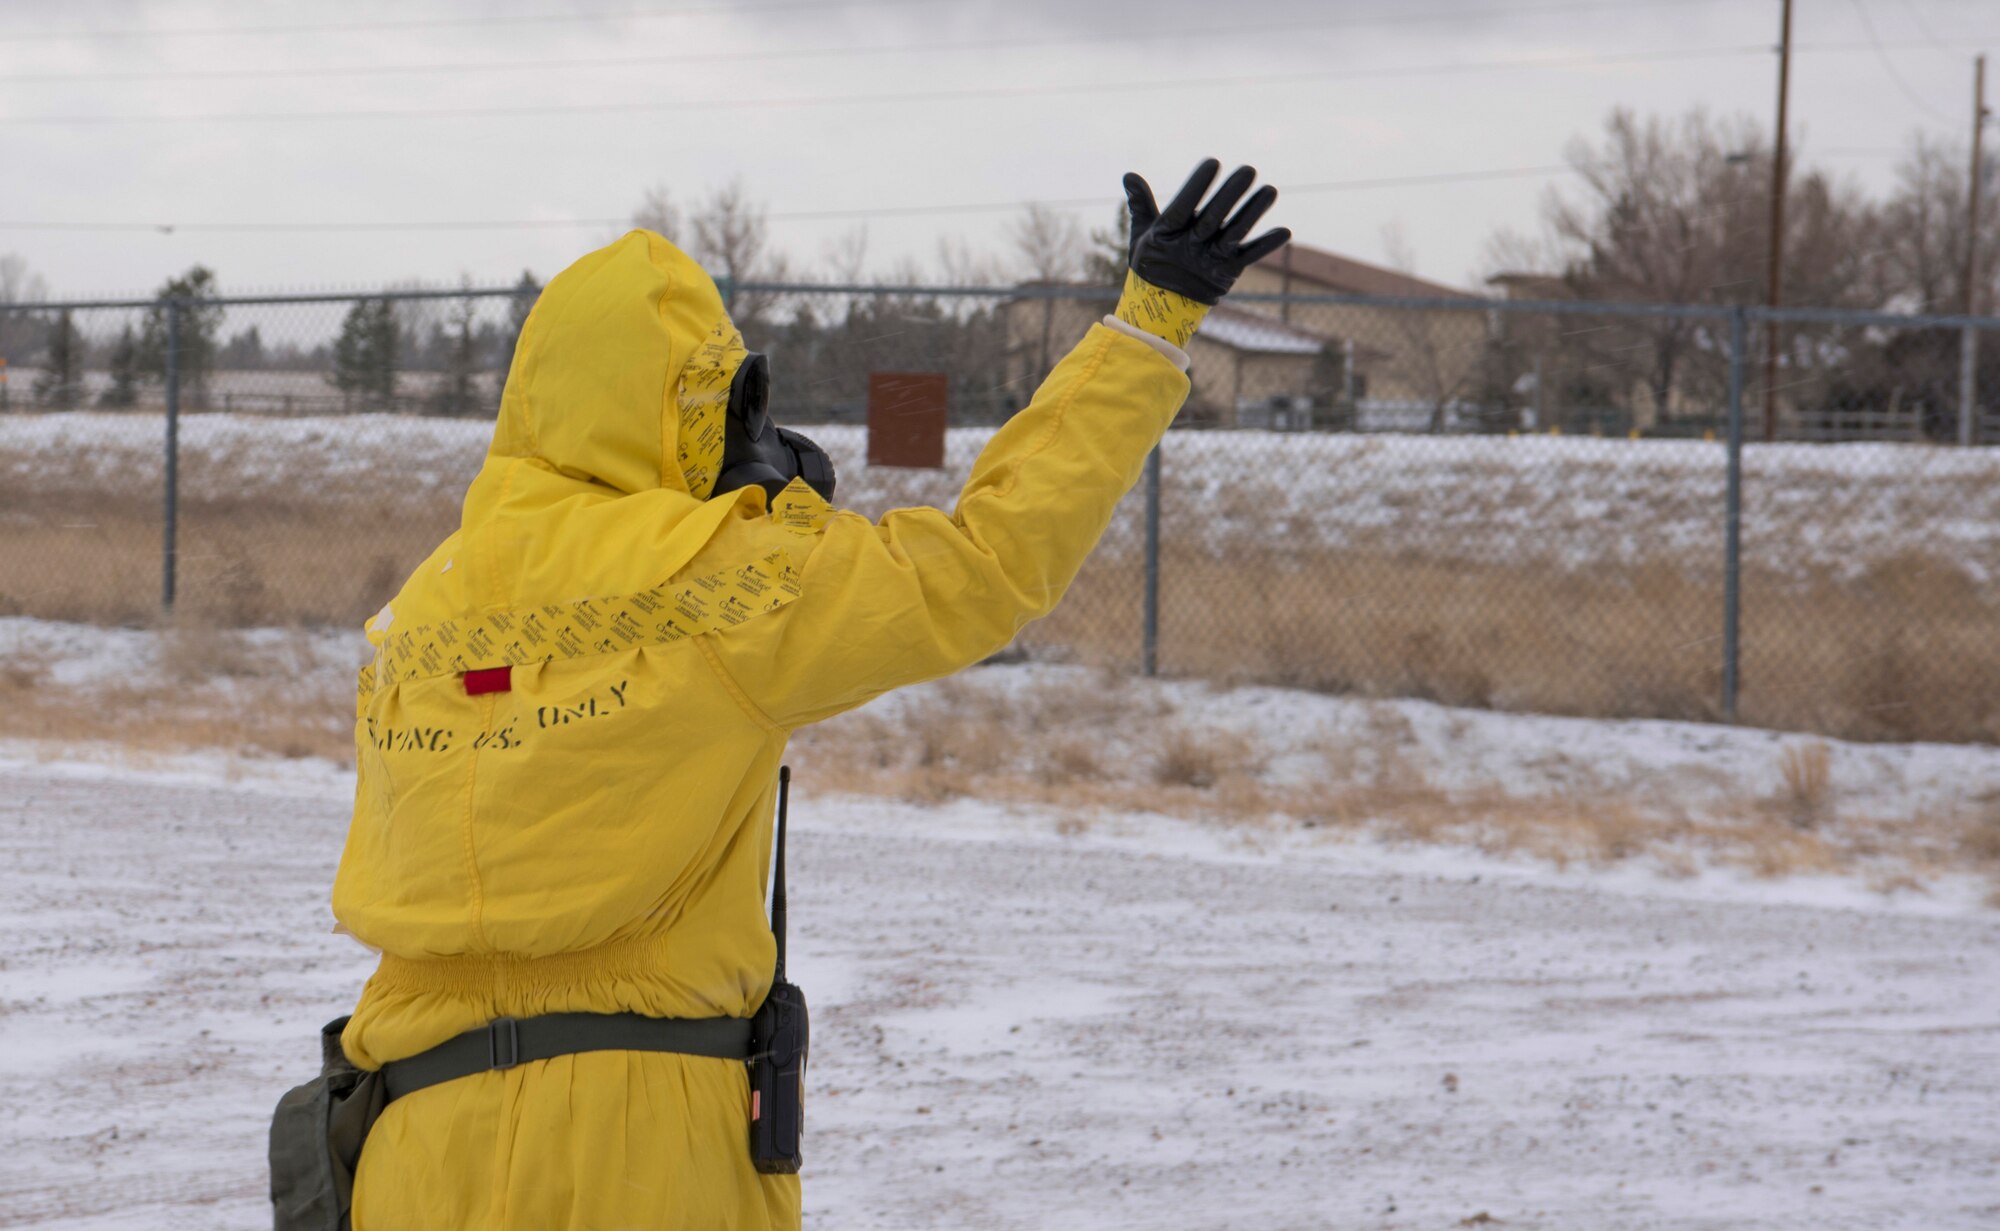 Senior Airman Mckenzie Williams, 90th Civil Engineering Squadron emergency management technician, signals to Explosive Ordnance Disposal that it is safe to proceed in to the cordon during an exercise on F.E. Warren Air Force Base, Wyo., Dec. 14, 2017. Exercises are paramount in keeping Airmen ready to jump into action when the need arises. (U.S. Air Force photo by Airman 1st Class Braydon Williams)